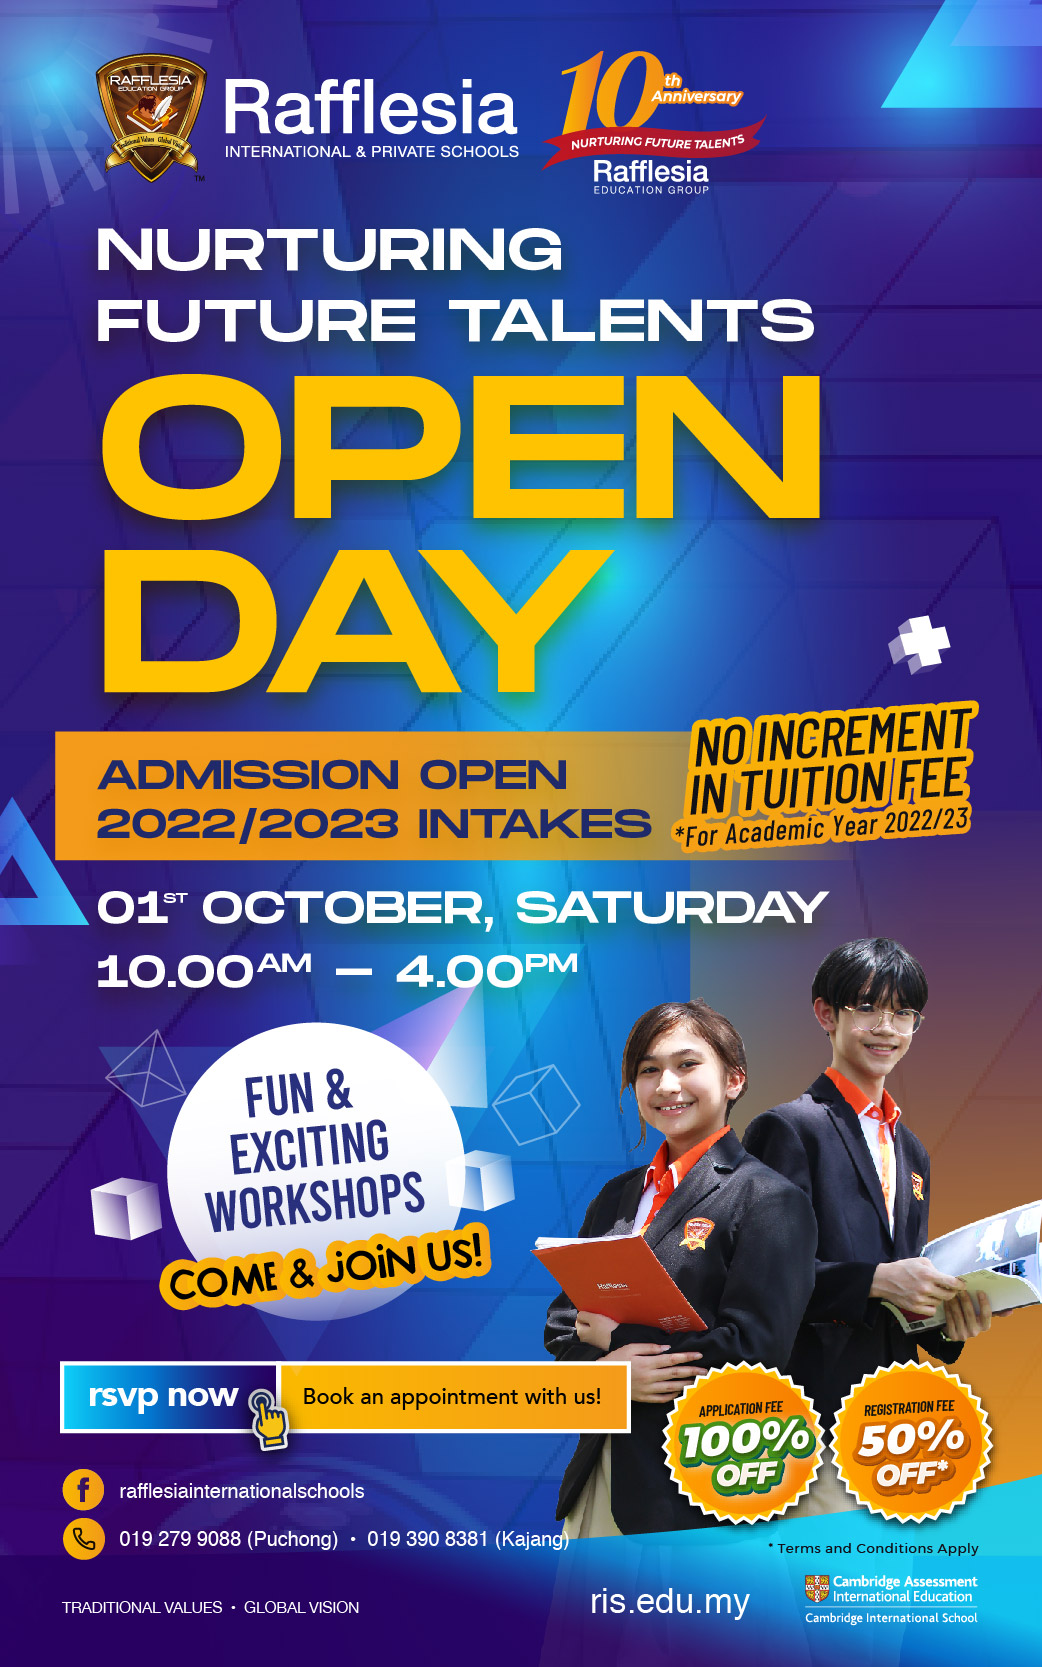 Open Day 01 October 2022